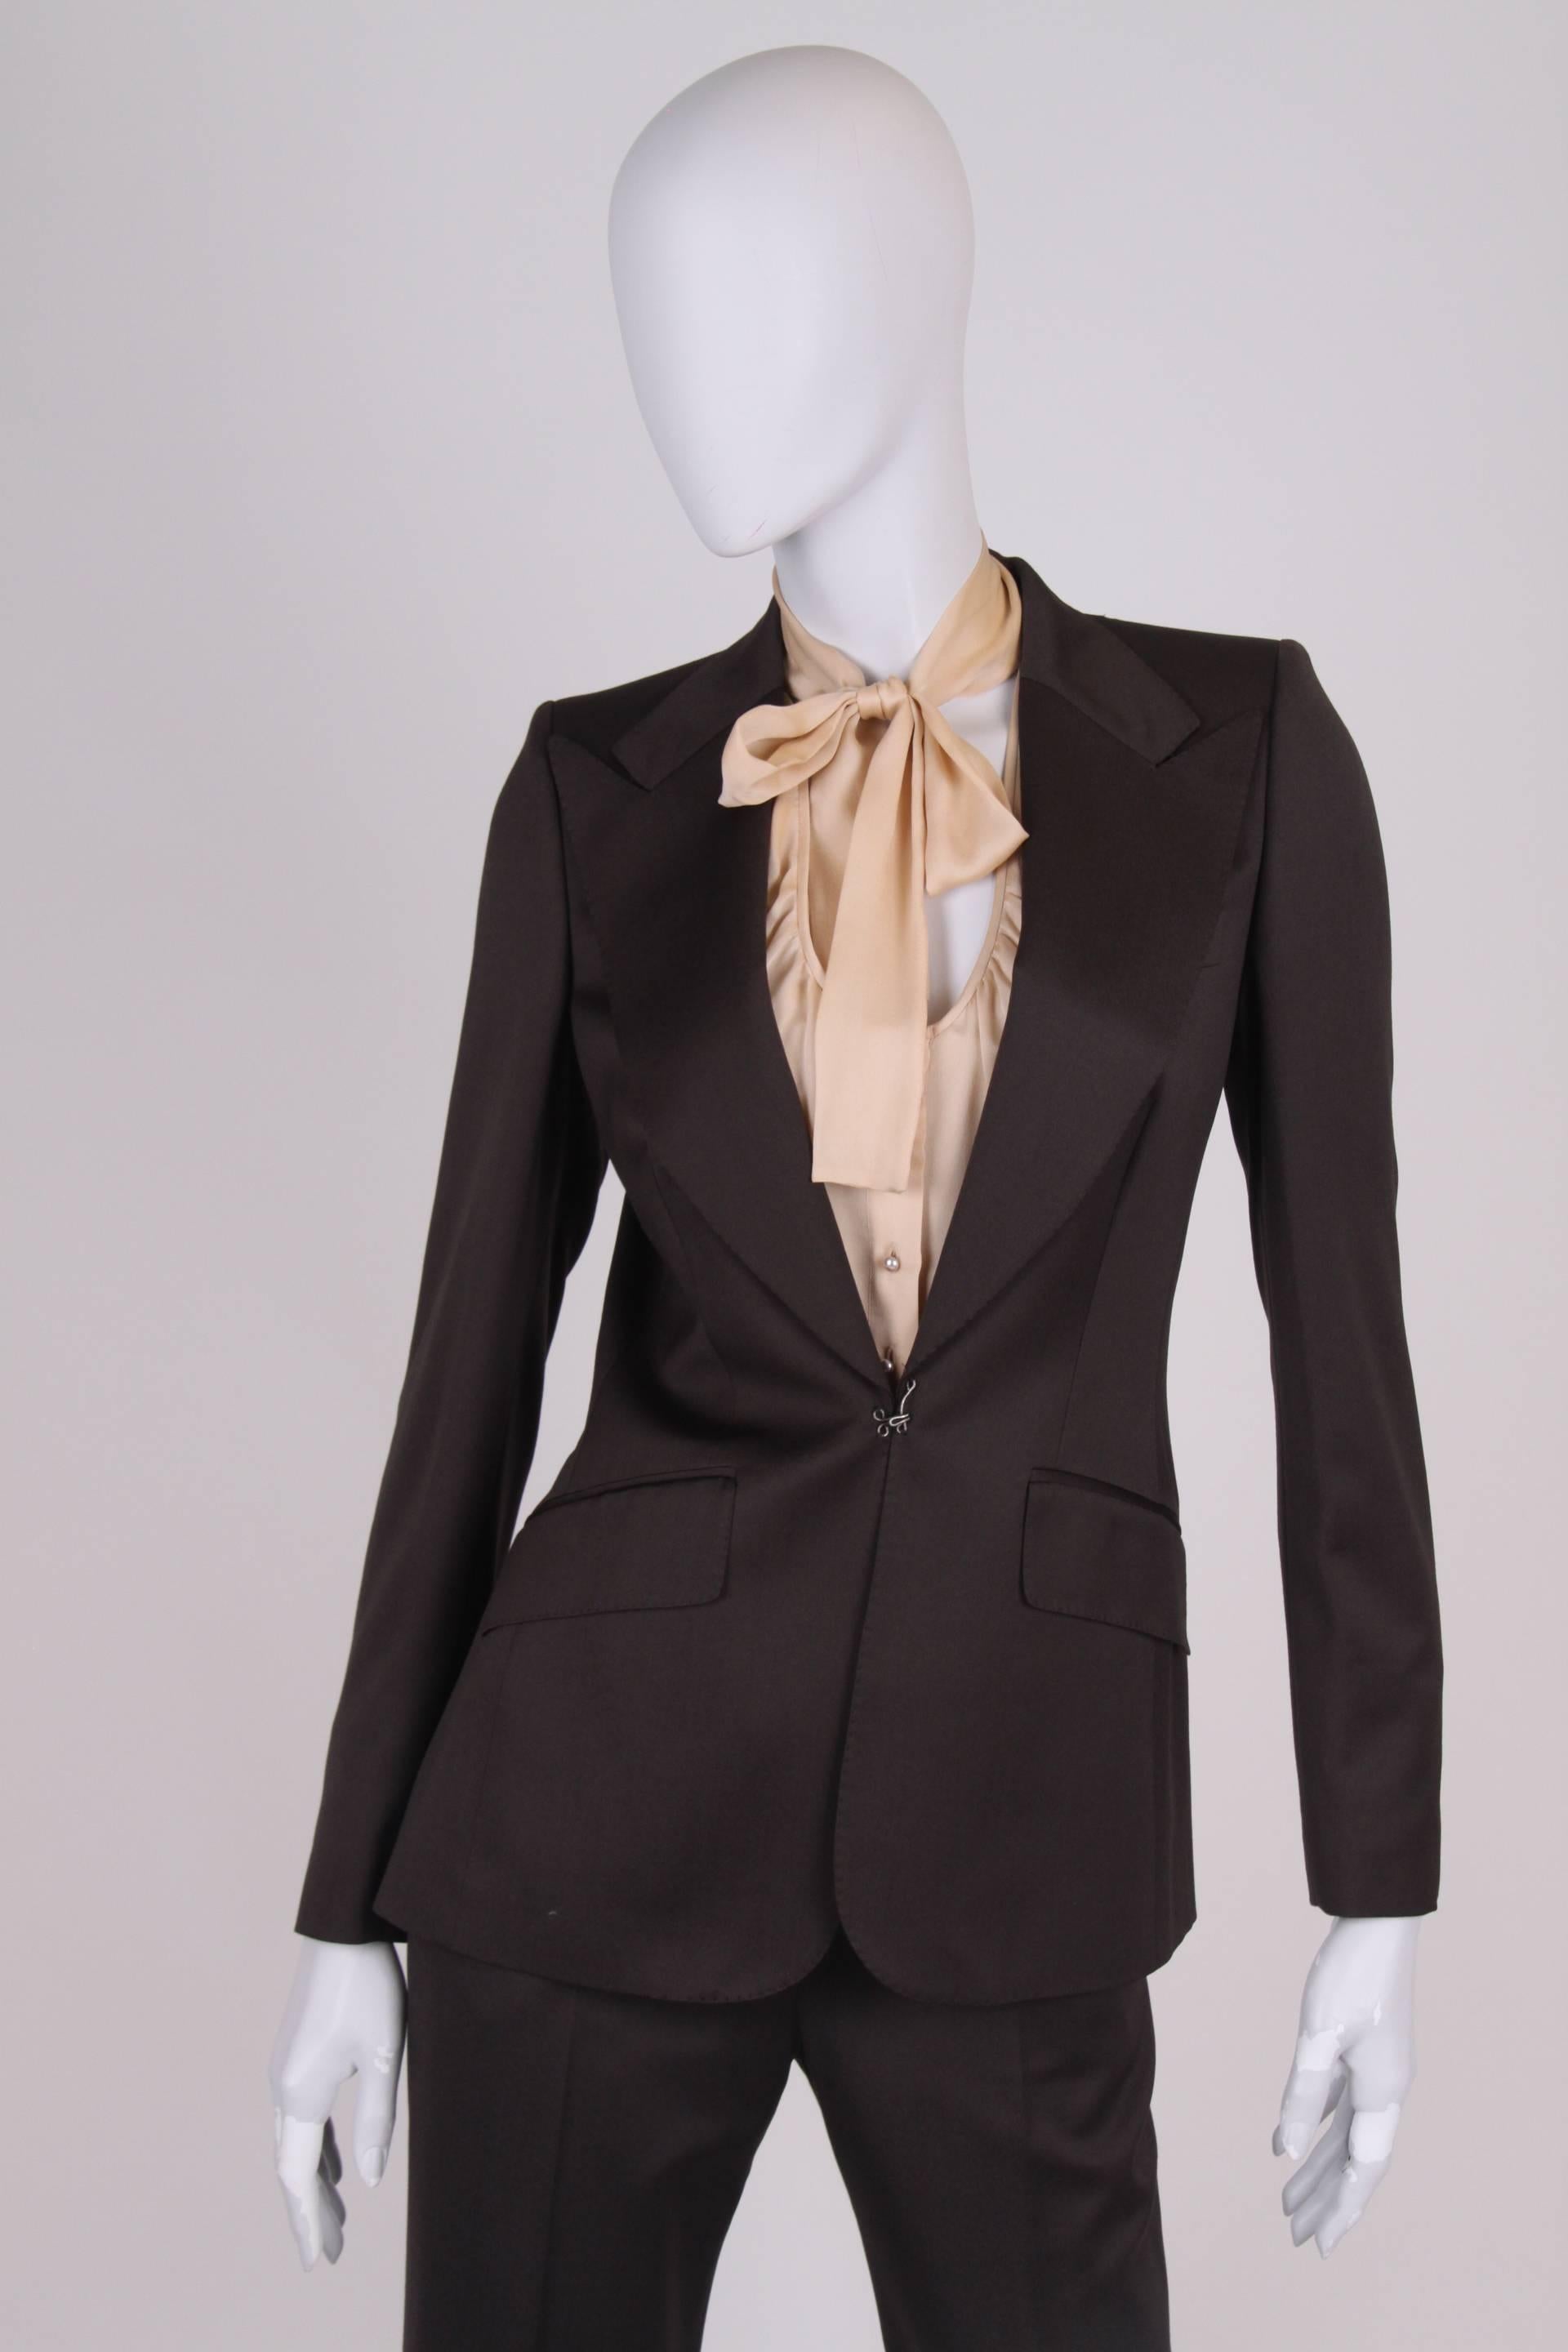 A dream! Wonderful two piece suit by Chloé in dark brown.

The jacket has tailored fitting and large lapels. Very light padding in the shoulders and silver-tone hook-and-eye closure at the front. At the end of the long sleeves you will find another